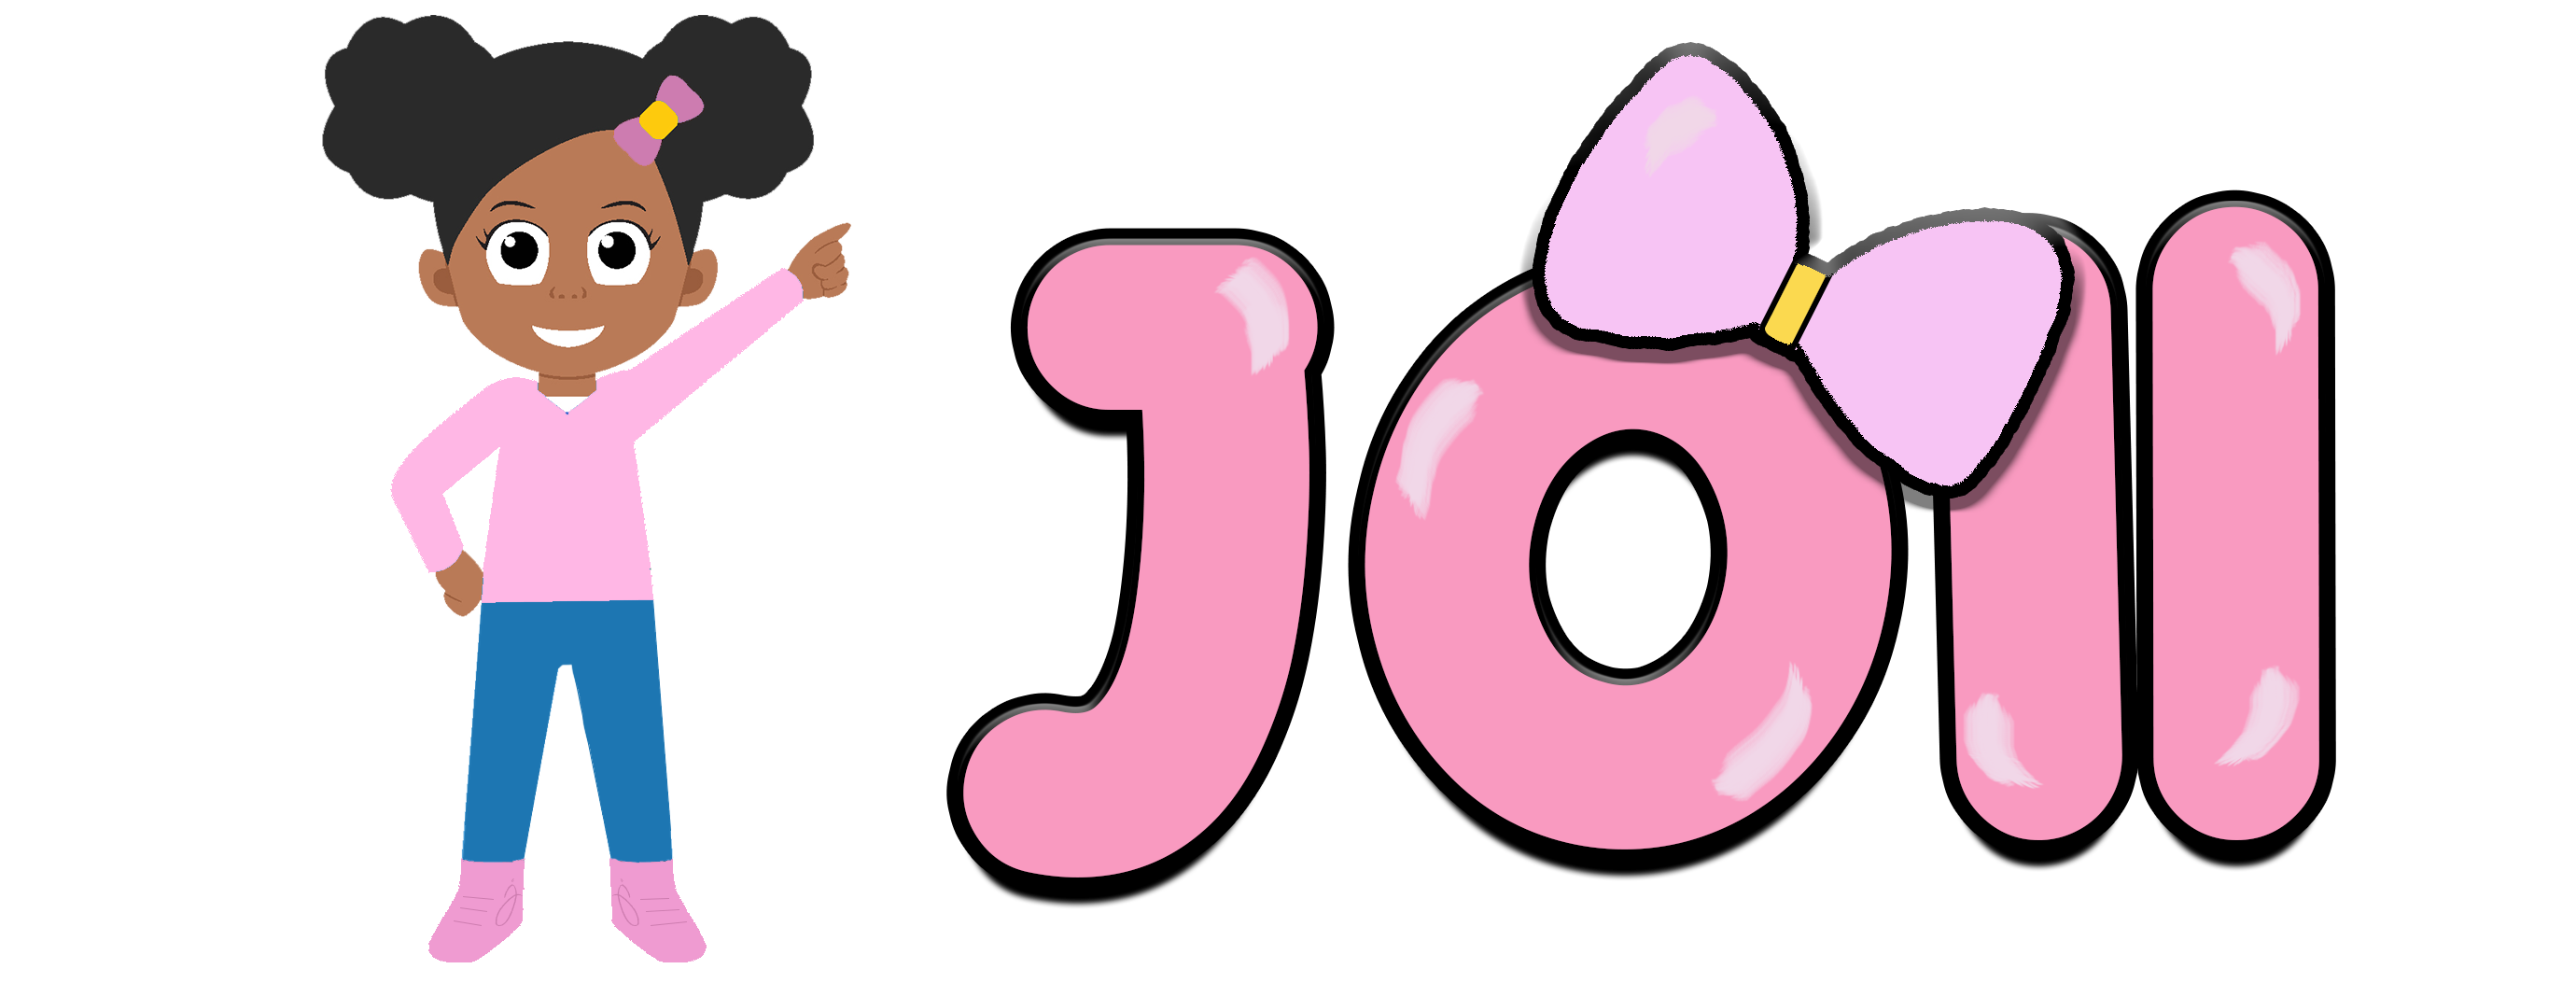 The Official Joii Brand Website